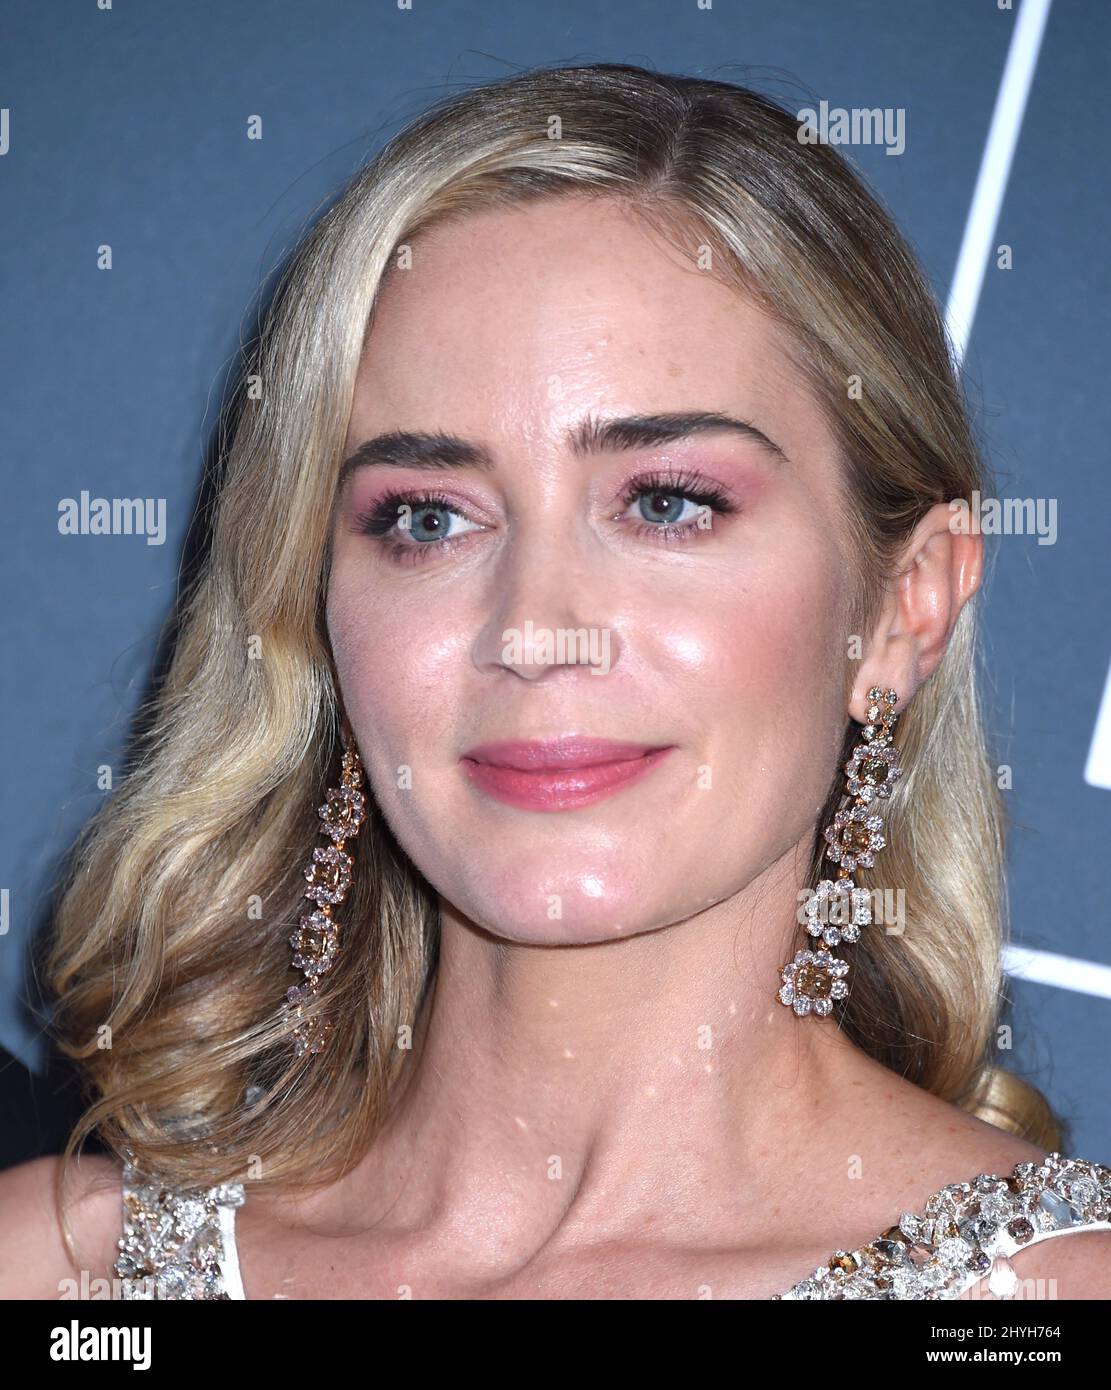 Emily Blunt at the 24th Annual Critics' Choice Awards Pressroom held at Barker Hanger on January 13, 2019 in Santa Monica, CA. Stock Photo